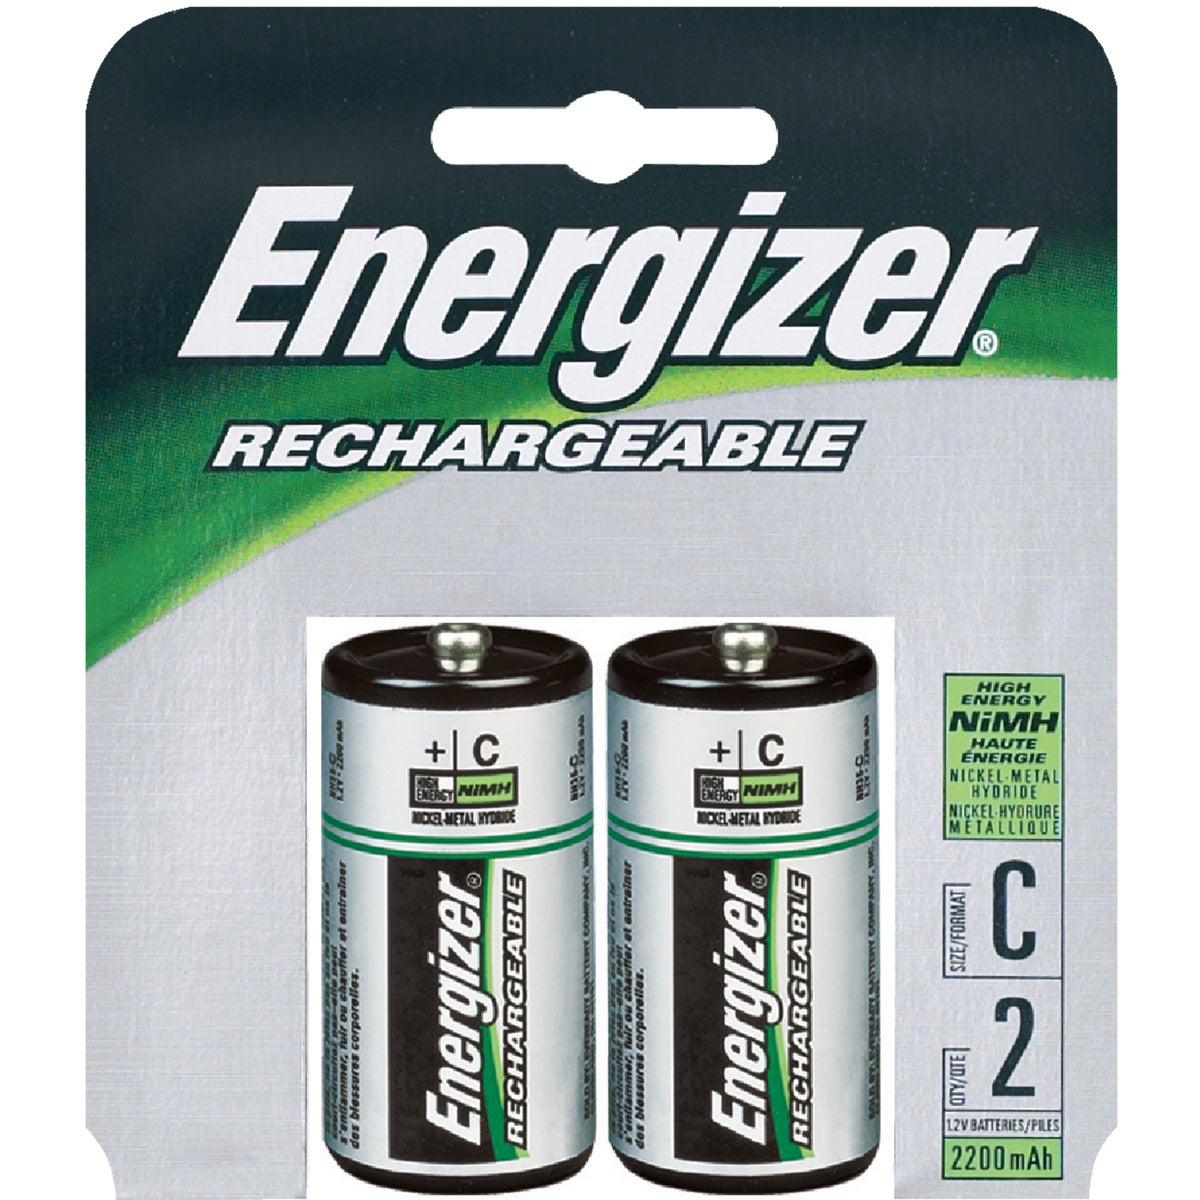 Energizer C NiMH Rechargeable Battery (2-Pack)